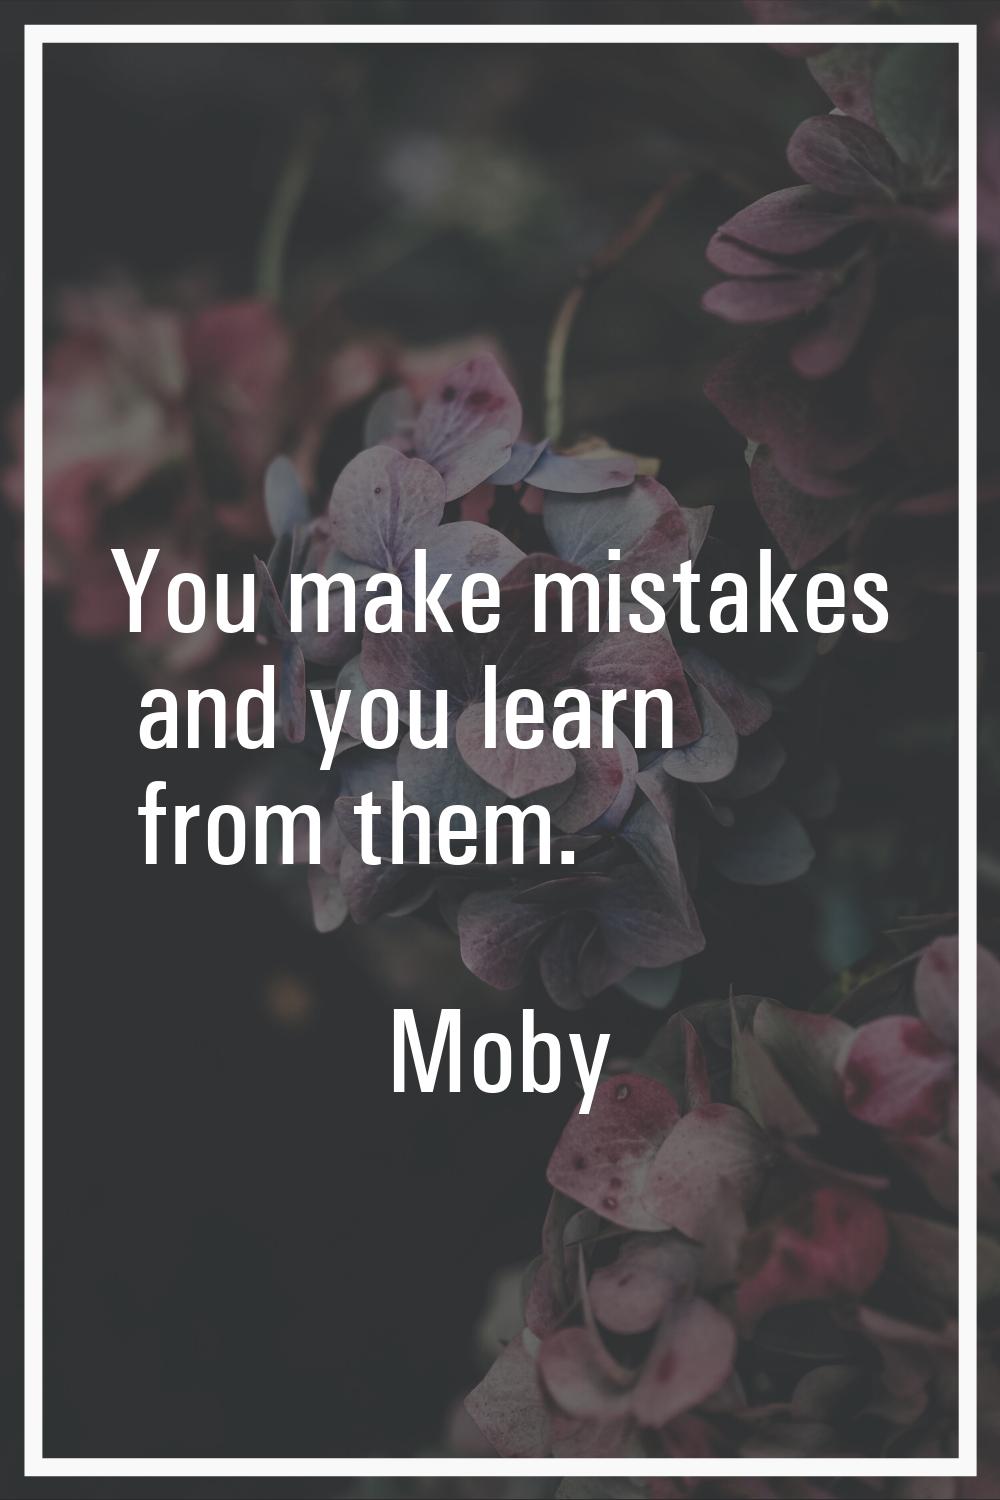 You make mistakes and you learn from them.